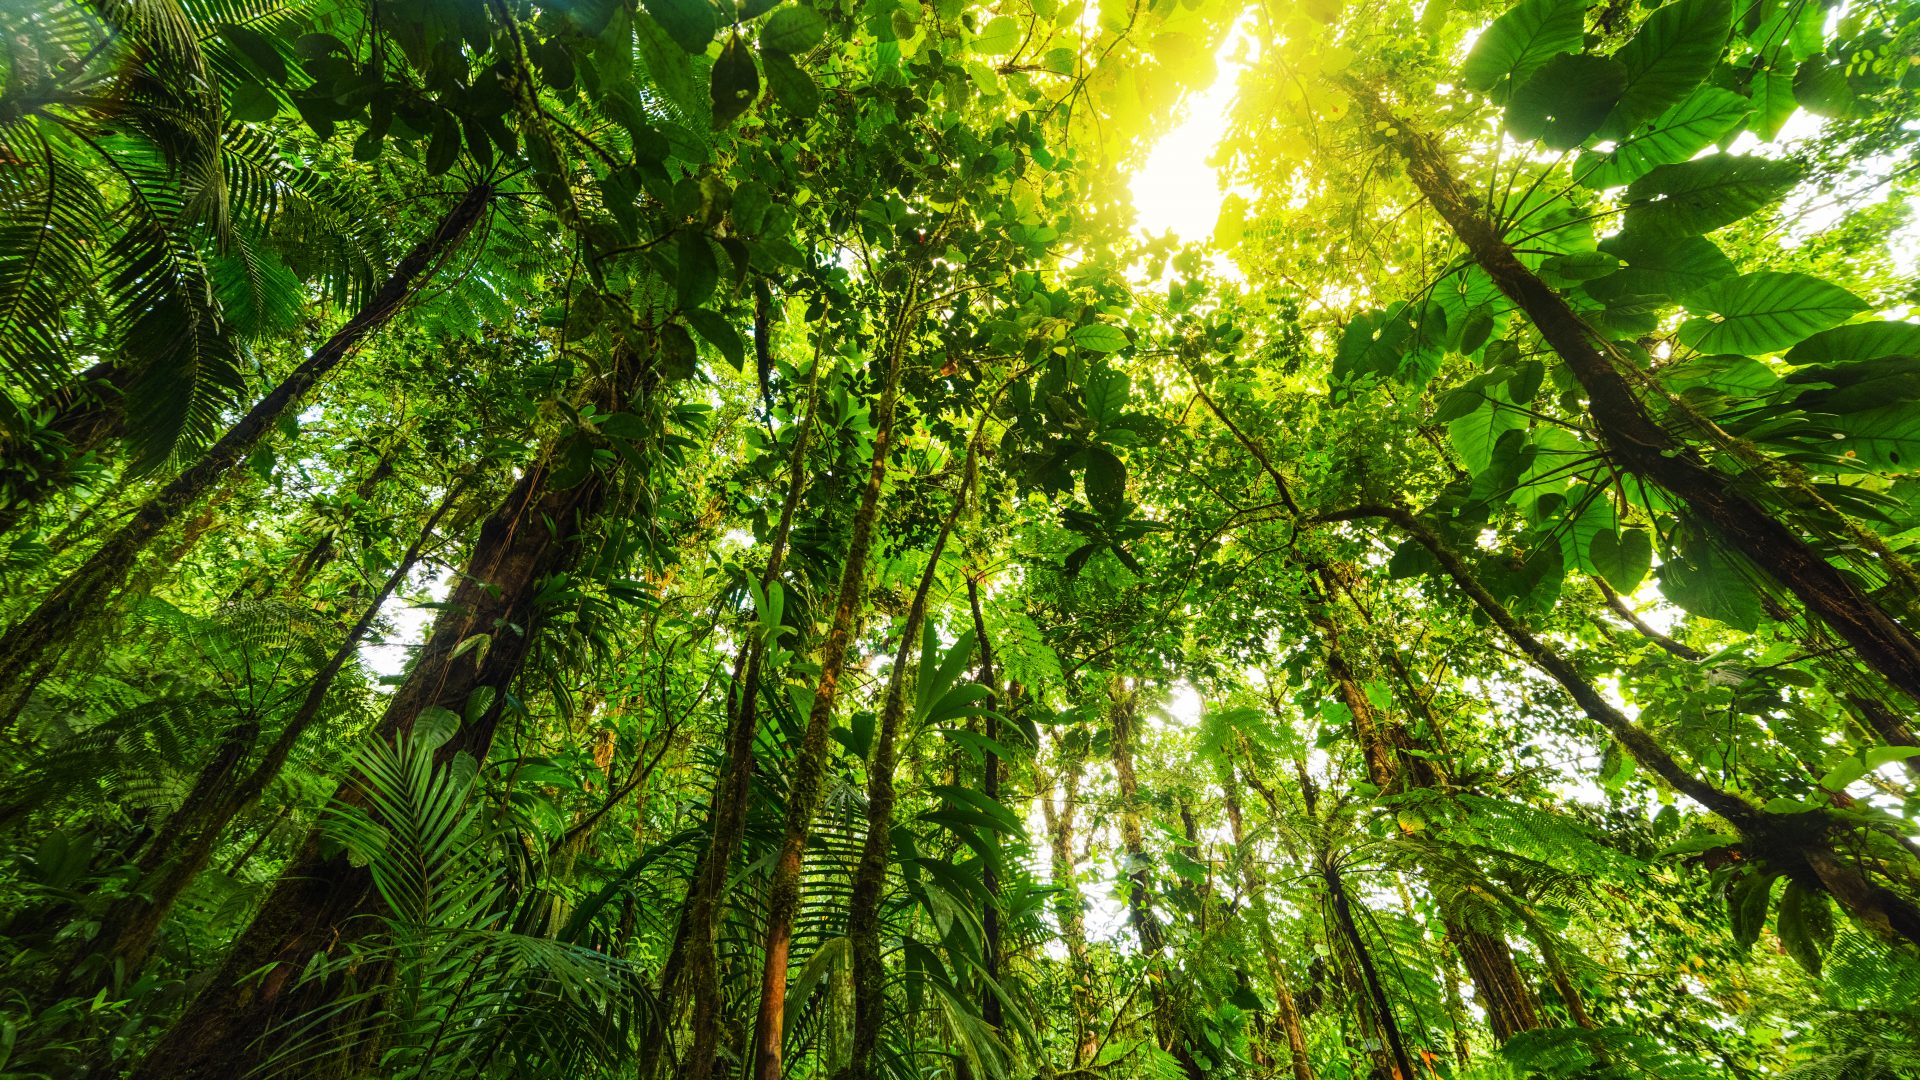 A low angle of rainforest trees with sun bursting through the canopy.